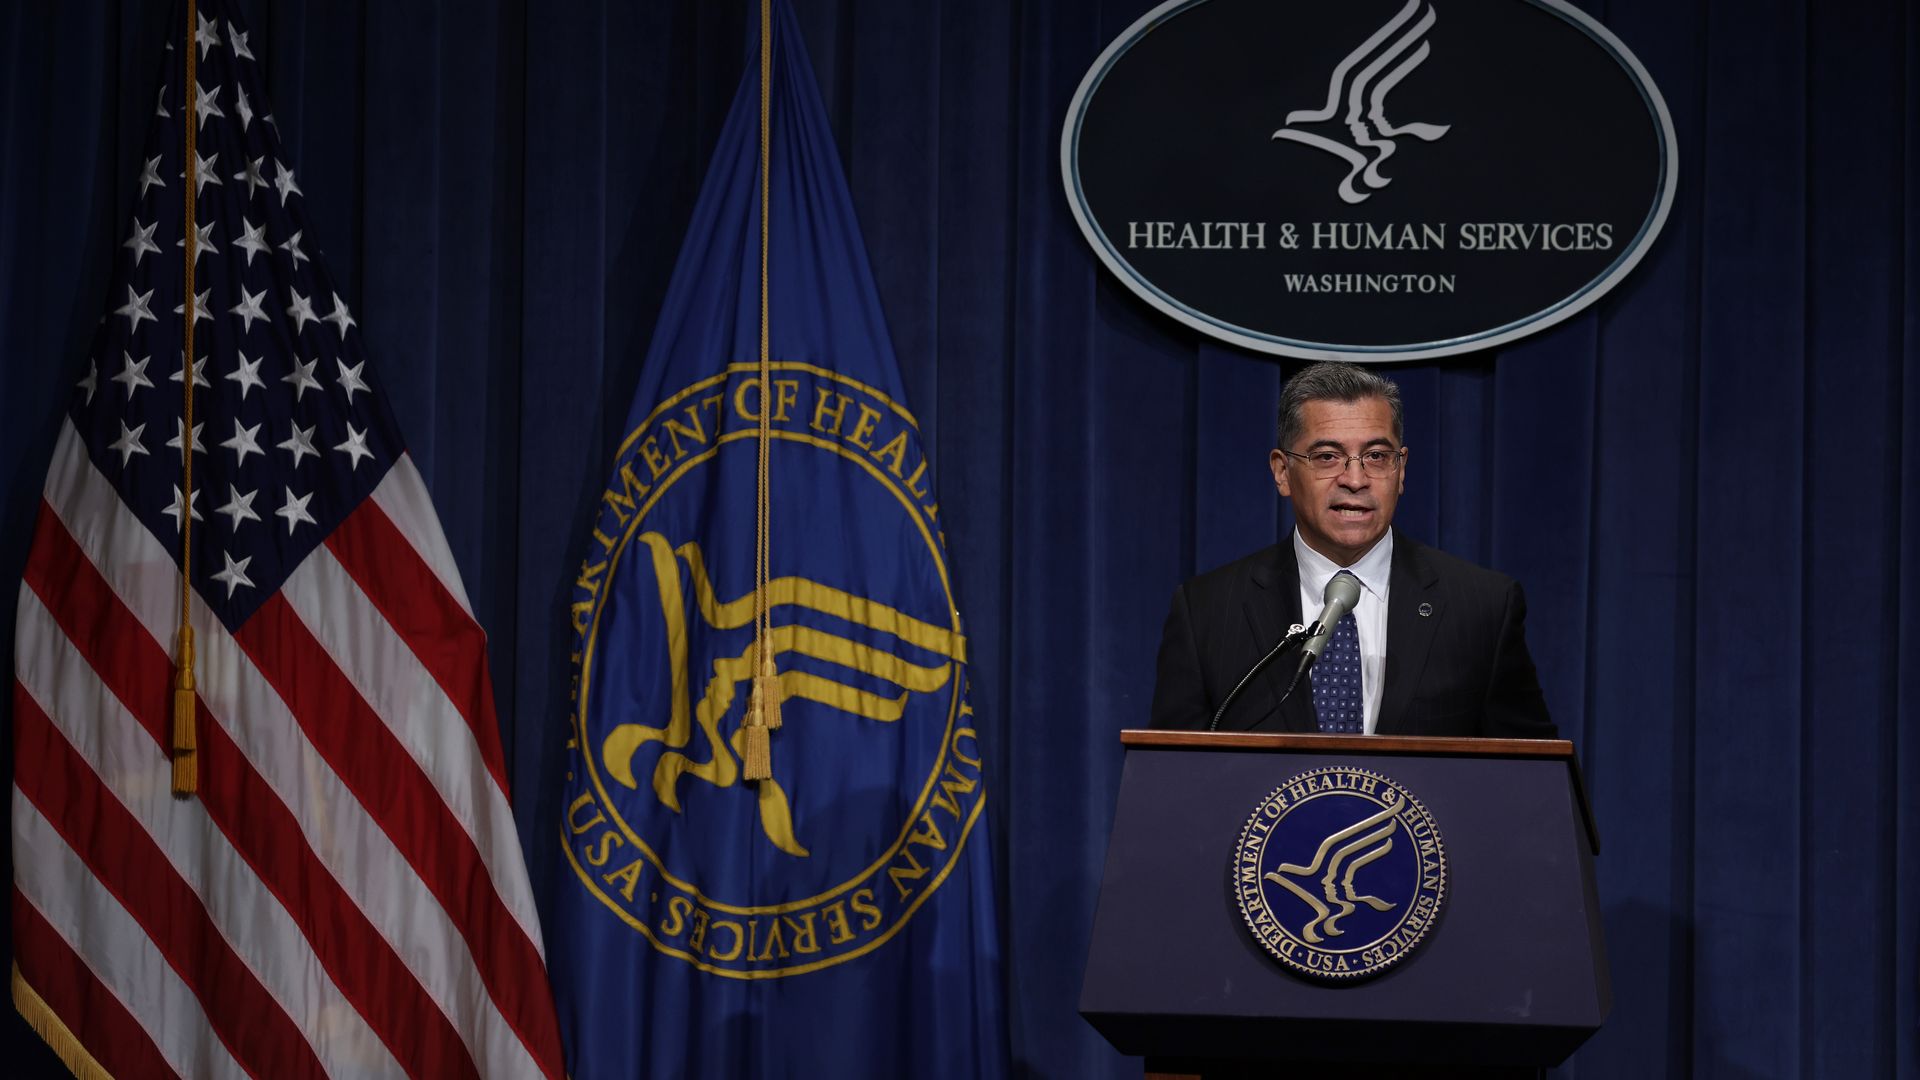 Photo of Xavier Becerra speaking from a podium with the HHS seal behind him